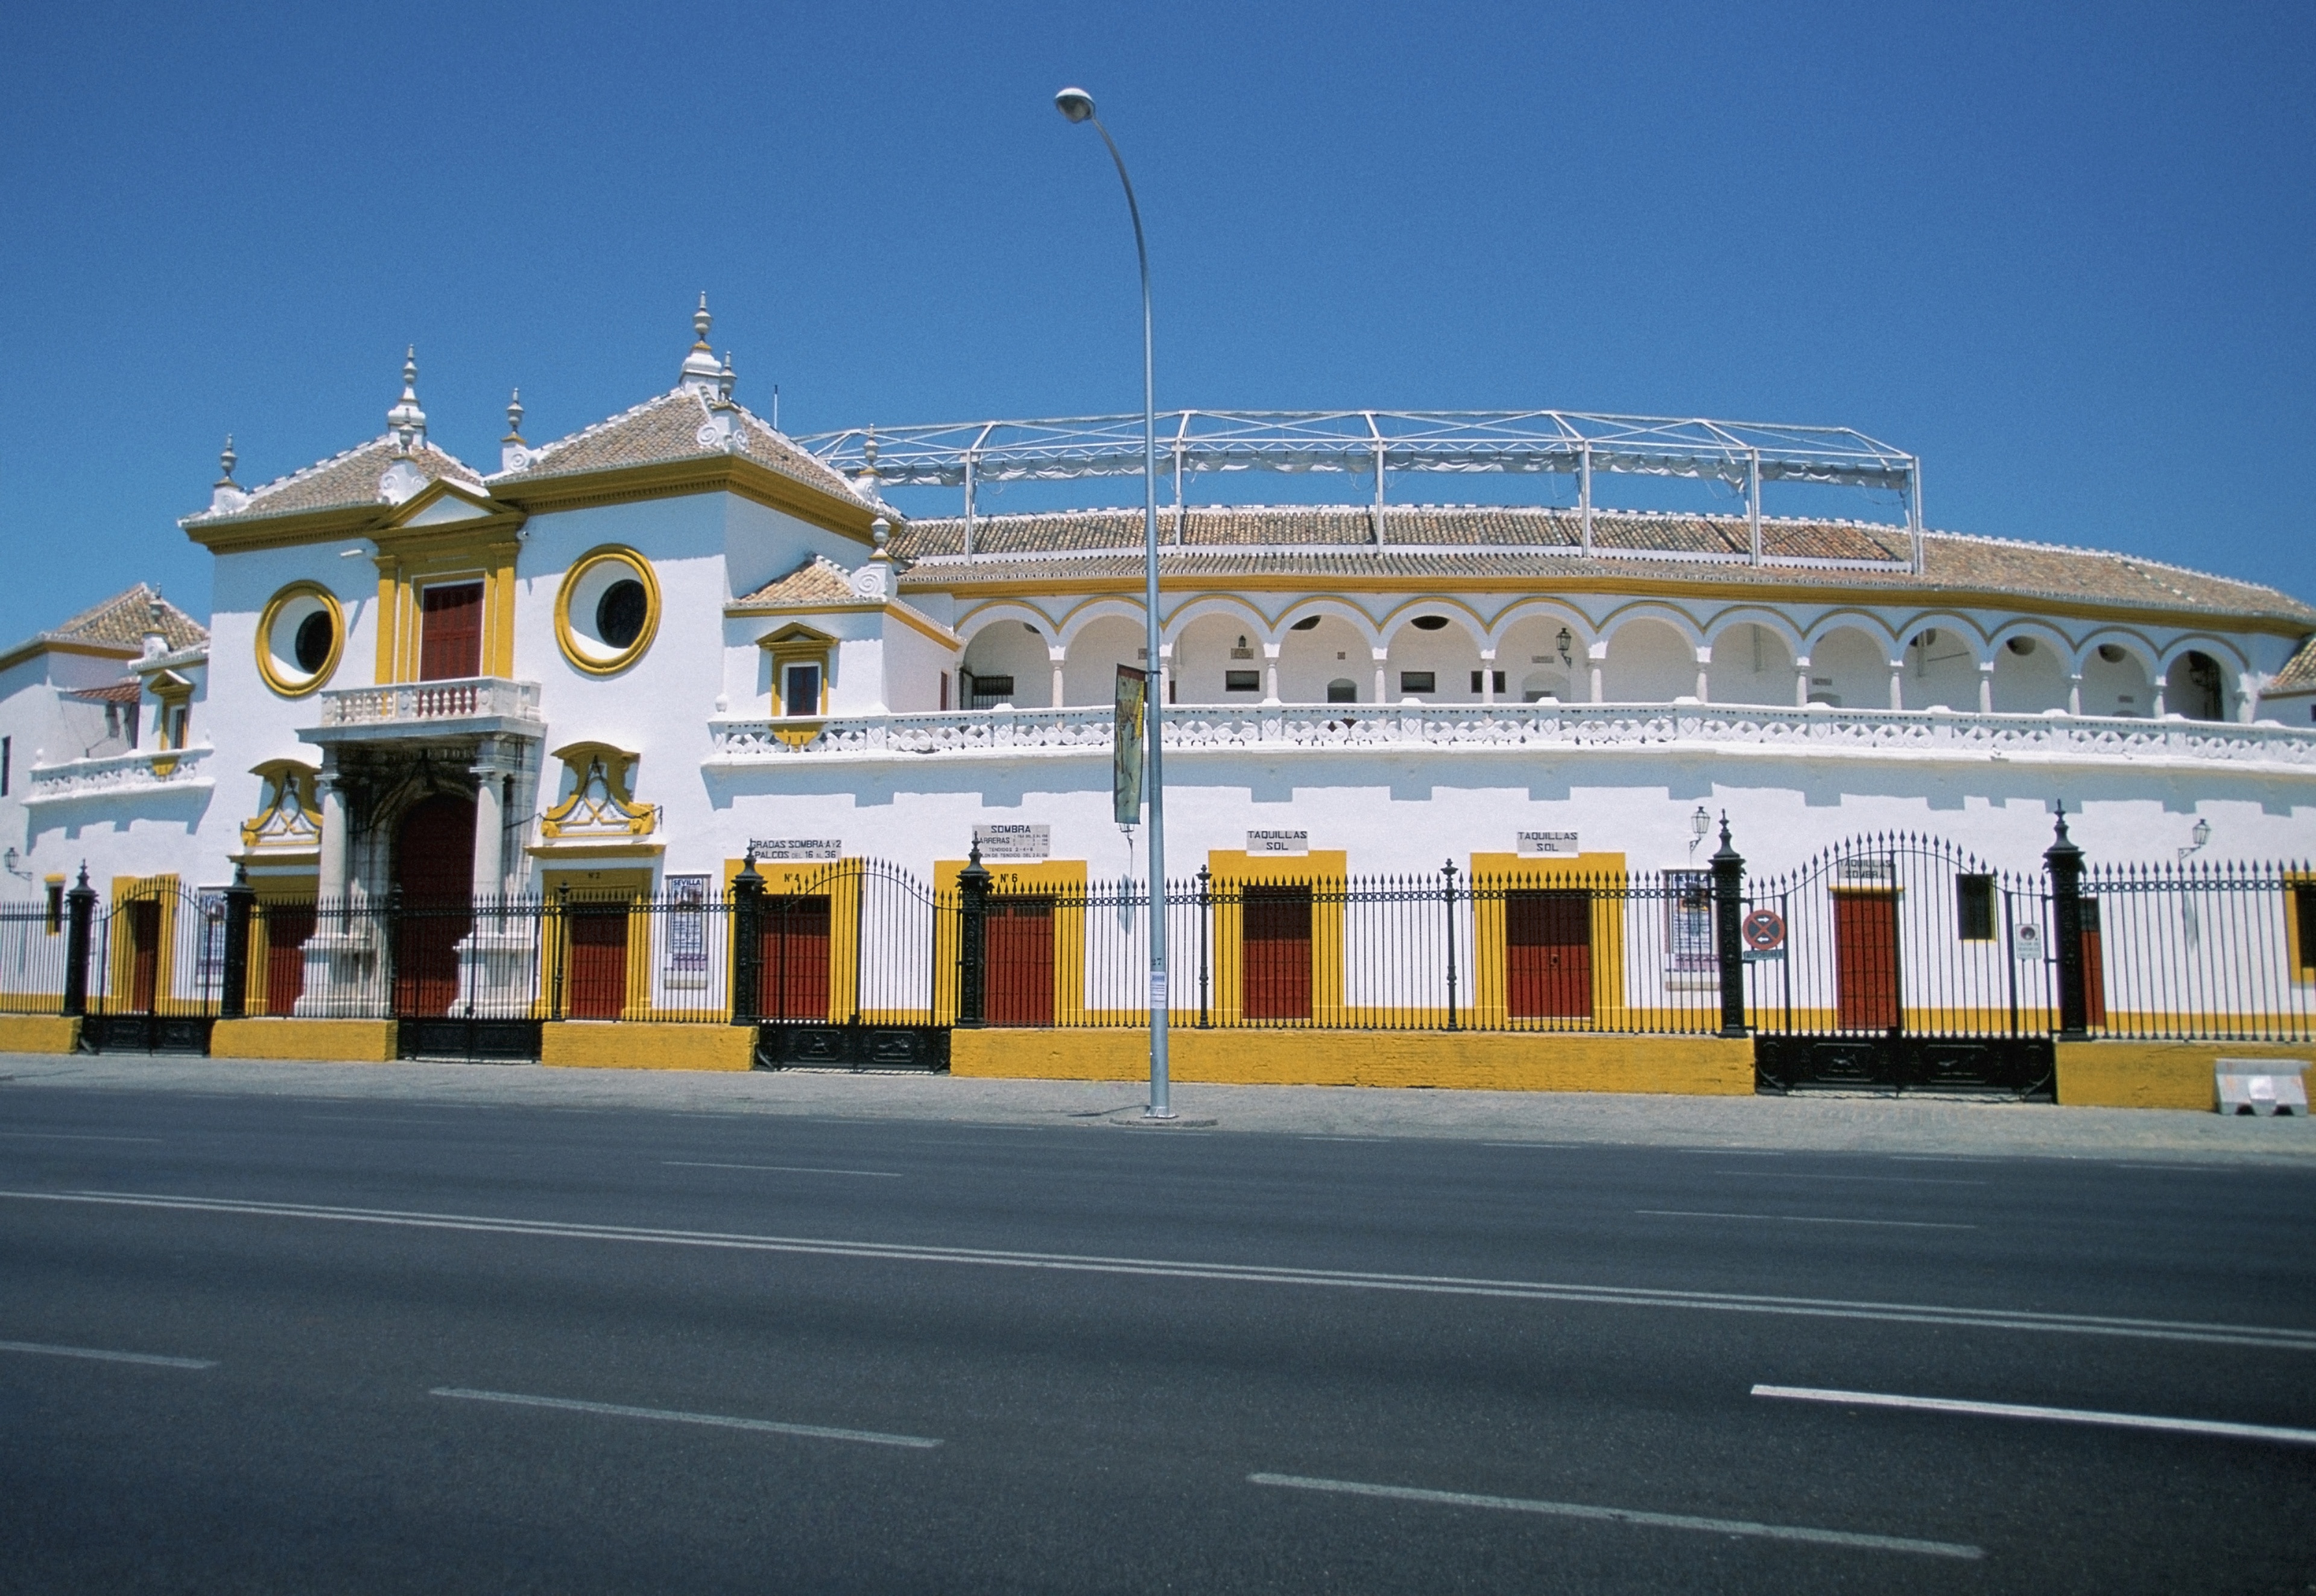 Learn about the importance of bullfighting to Sevillano culture with a behind-the-scenes experience at this well-known bullring.